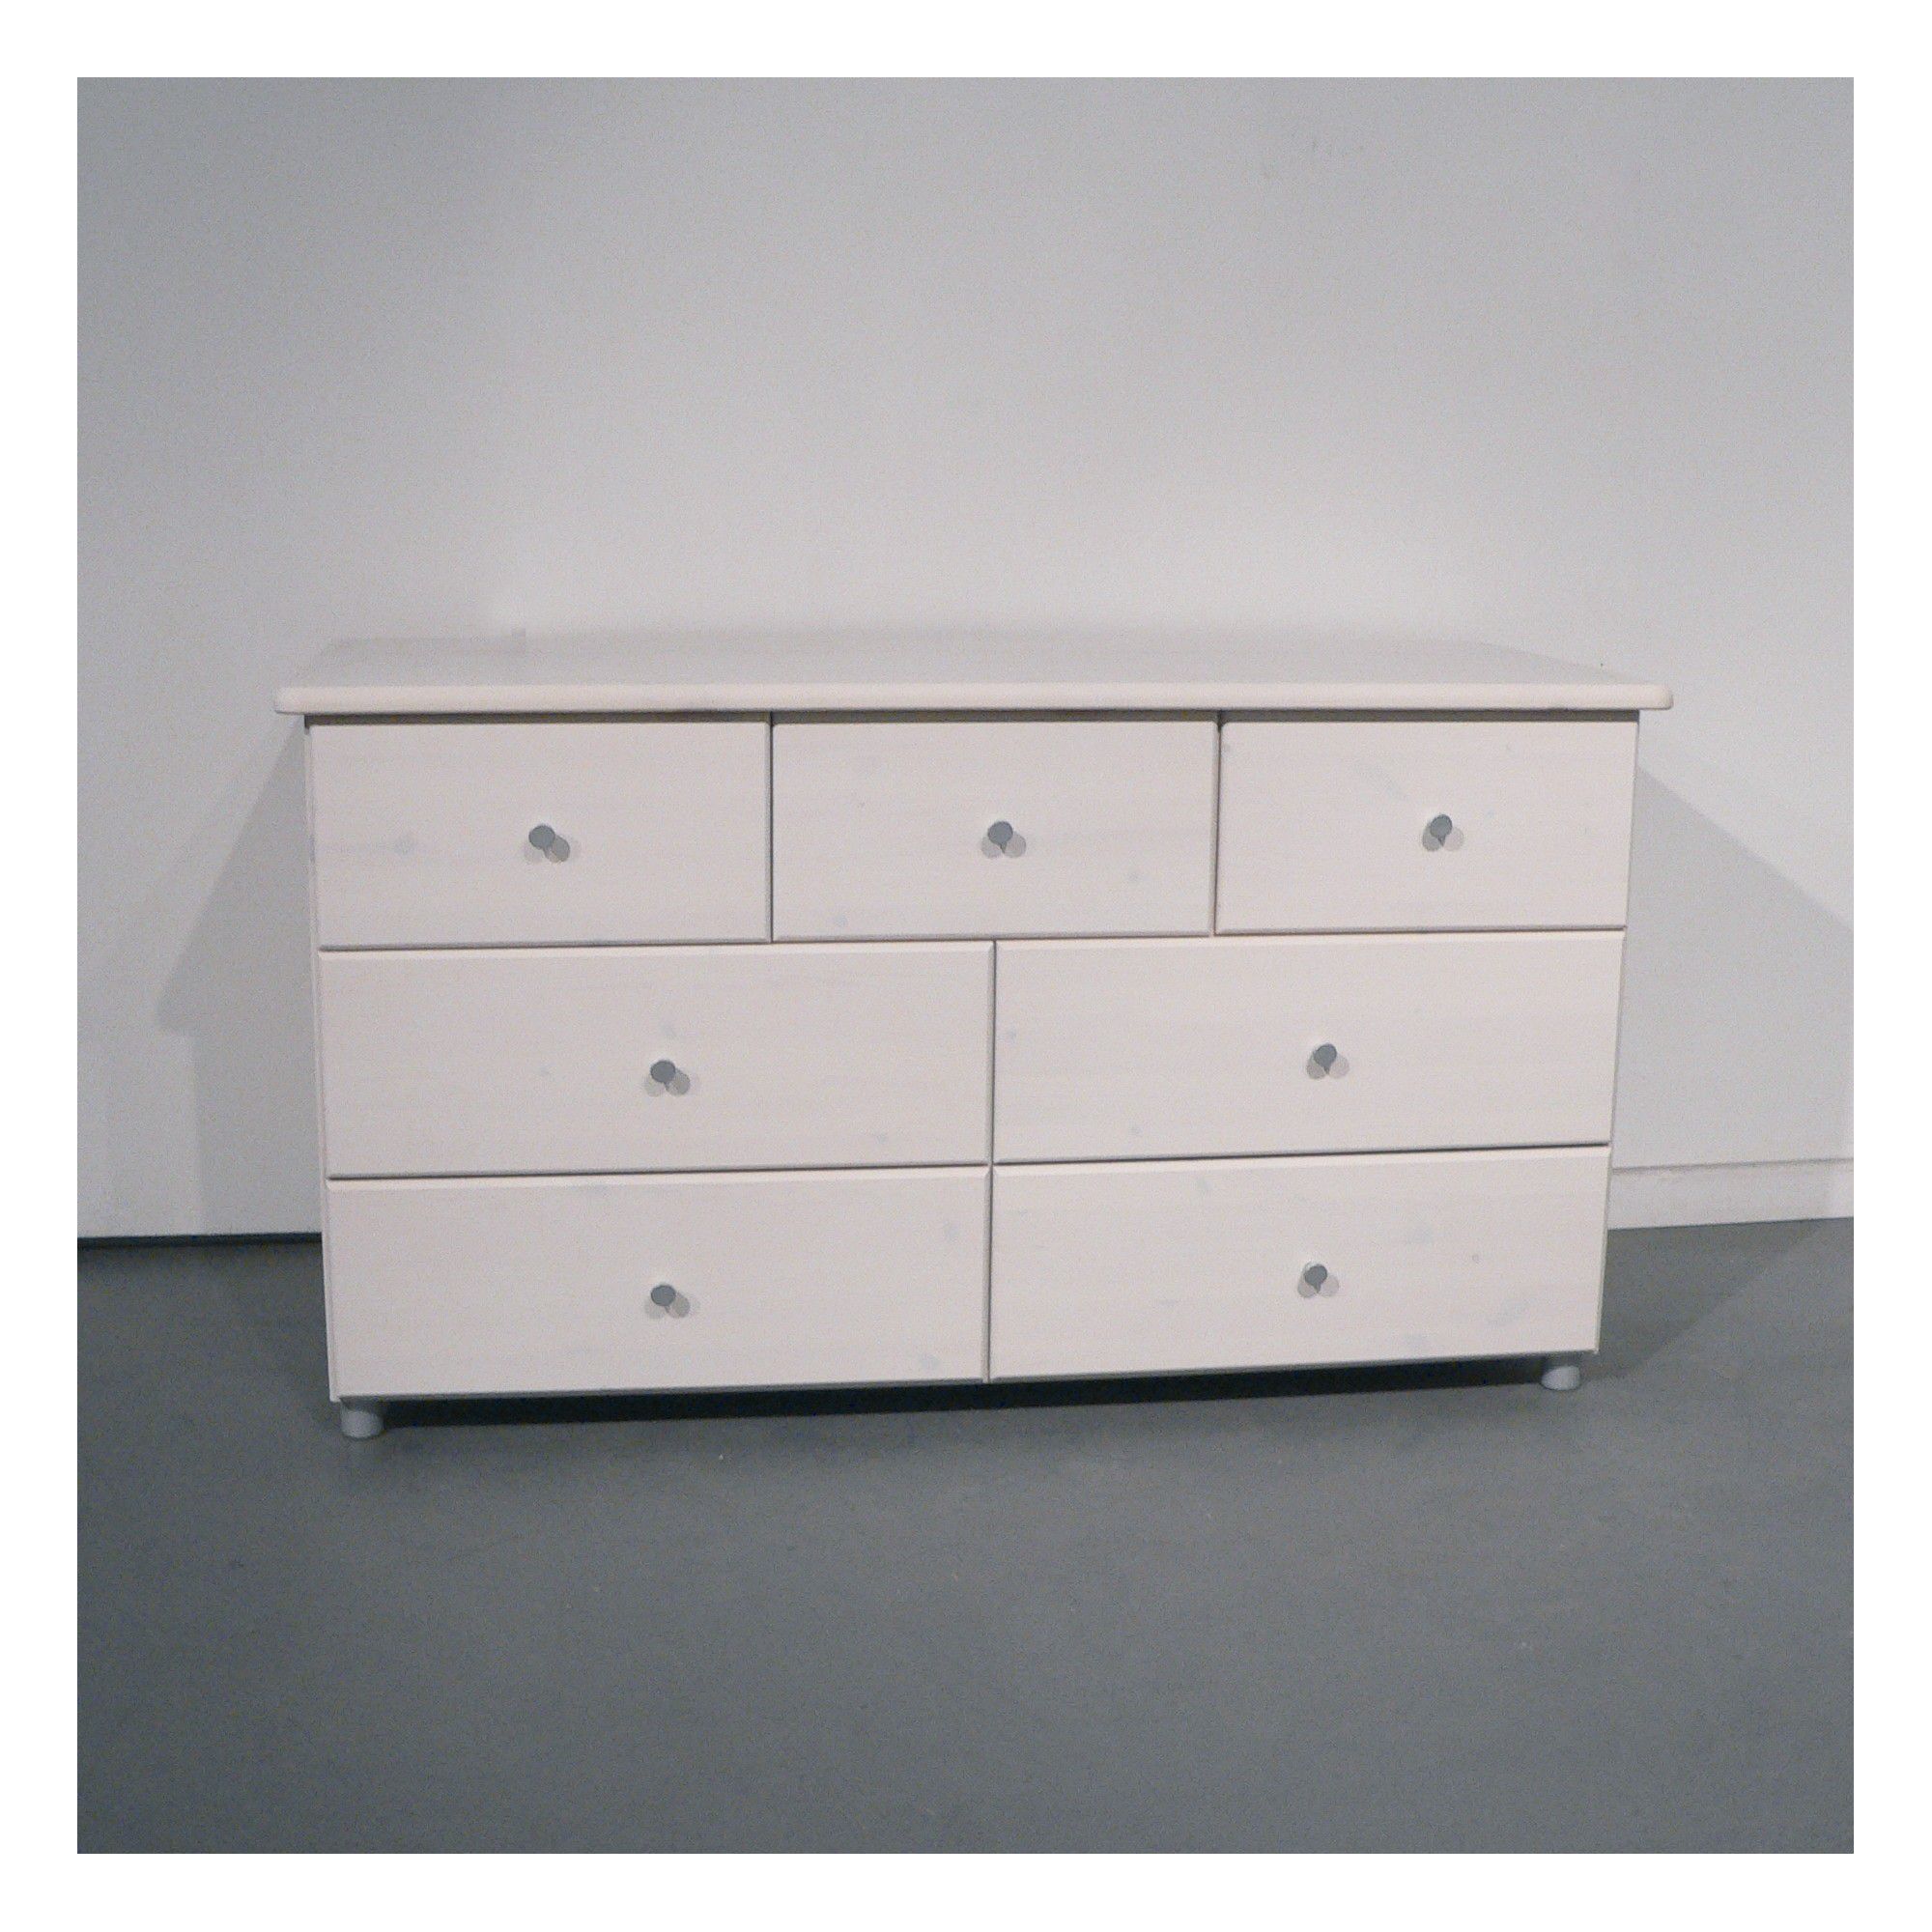 Oestergaard Missa Chest of Drawers 125cm - Honey lacquered at Tesco Direct